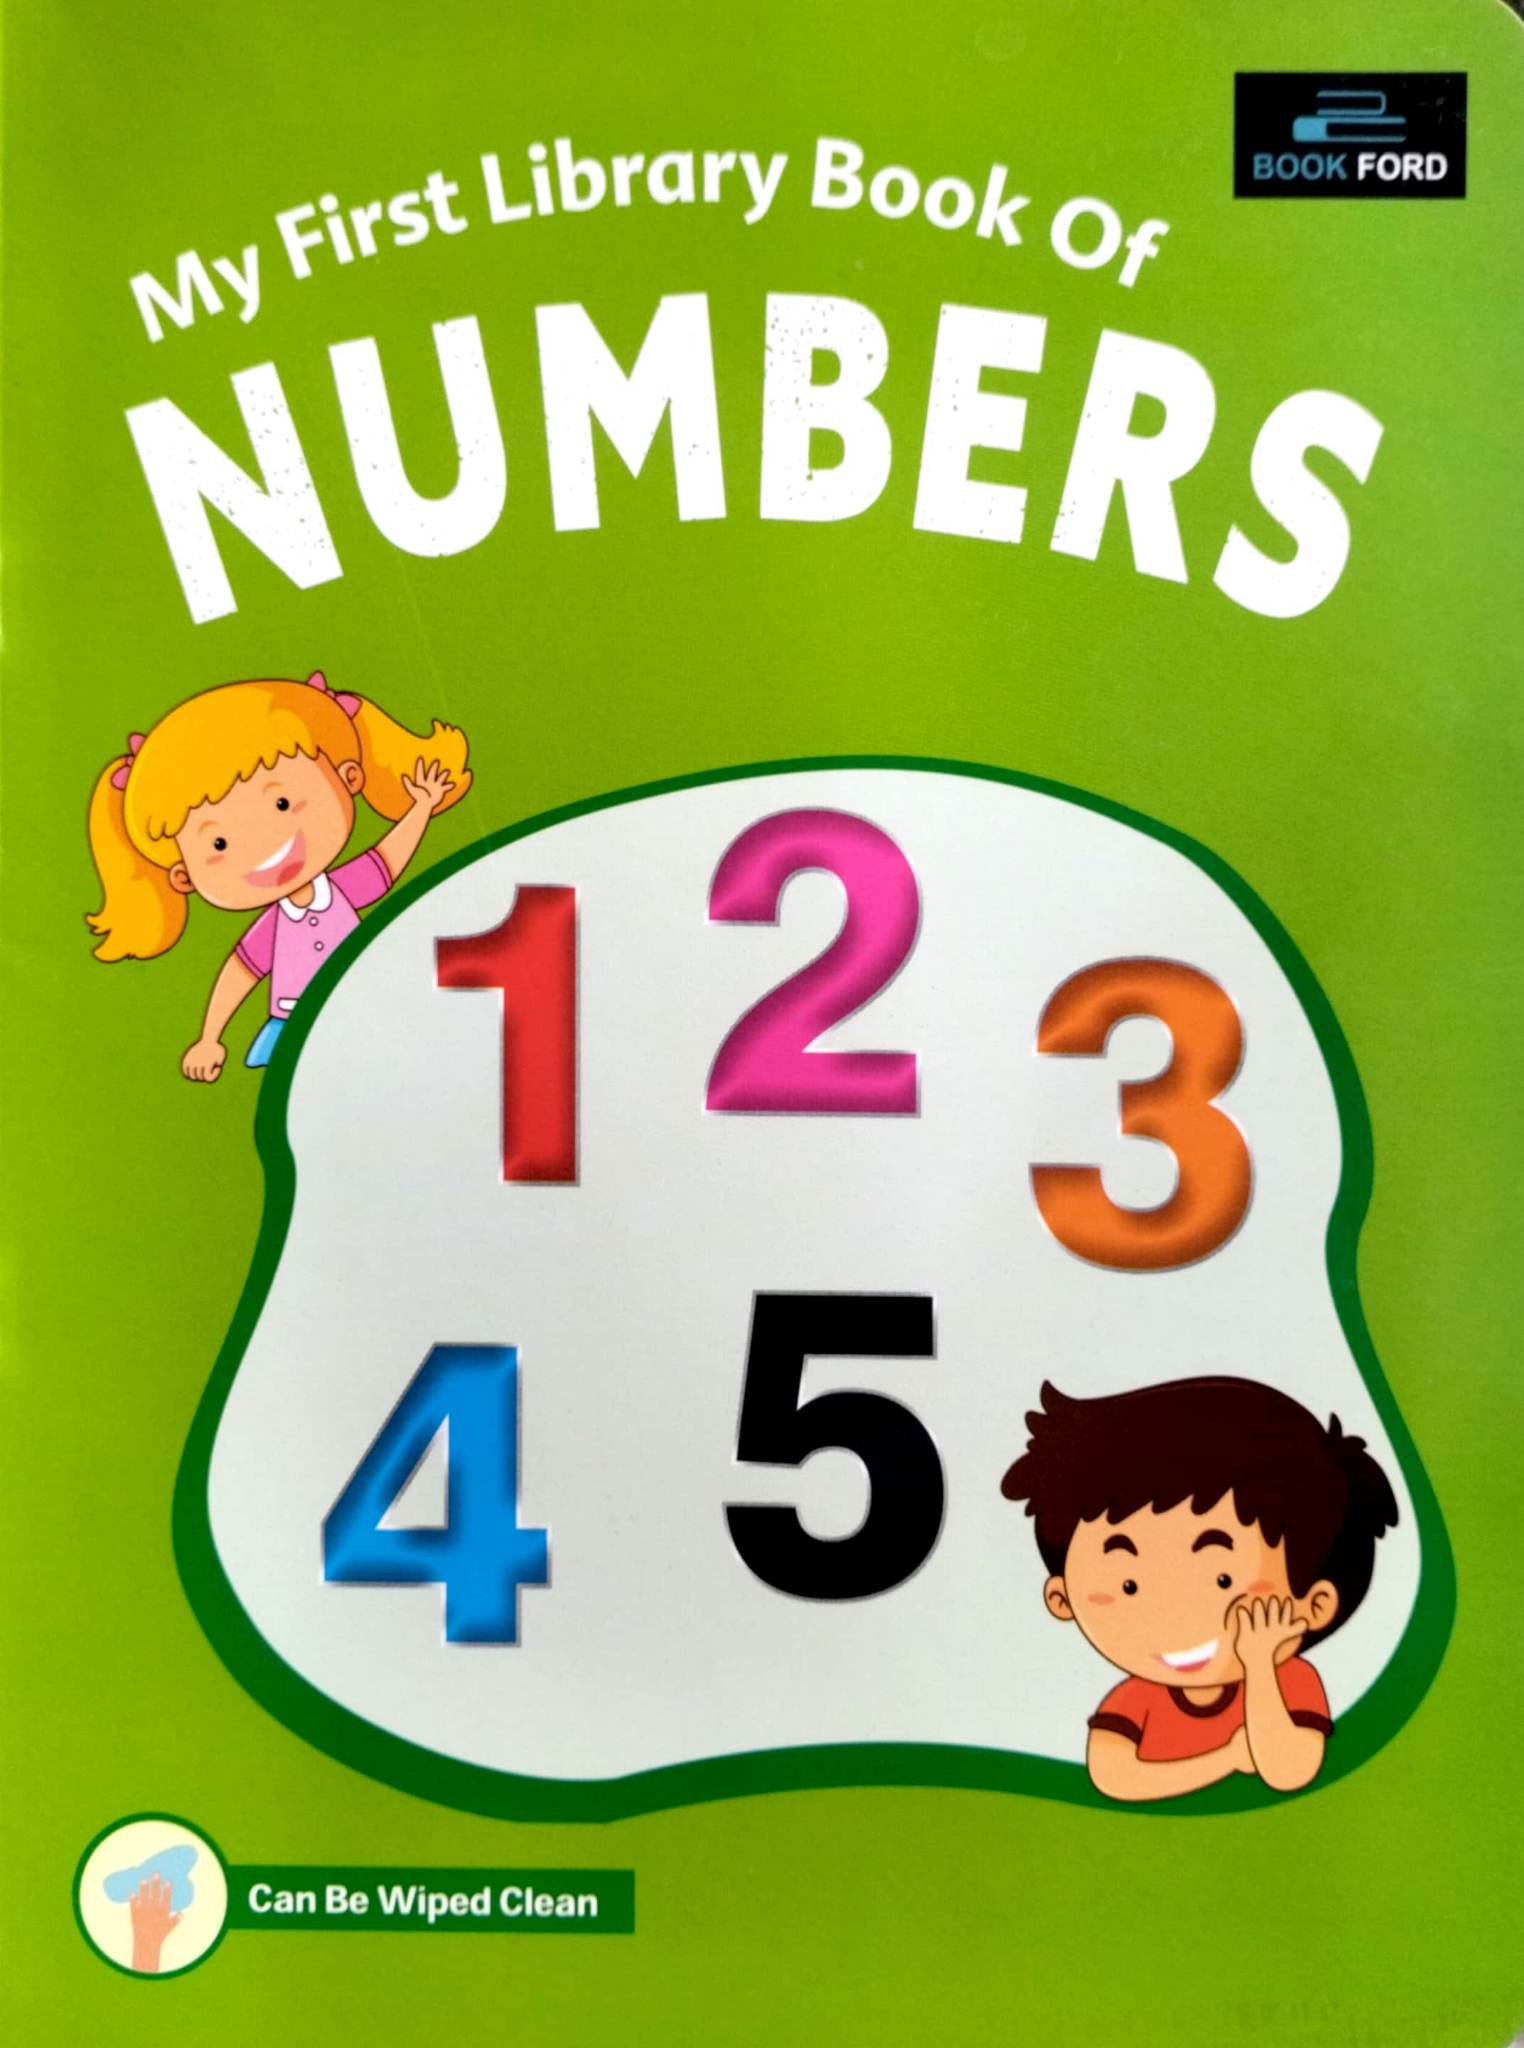 My First Library Book Of Numbers 12345 (পেপারব্যাক)